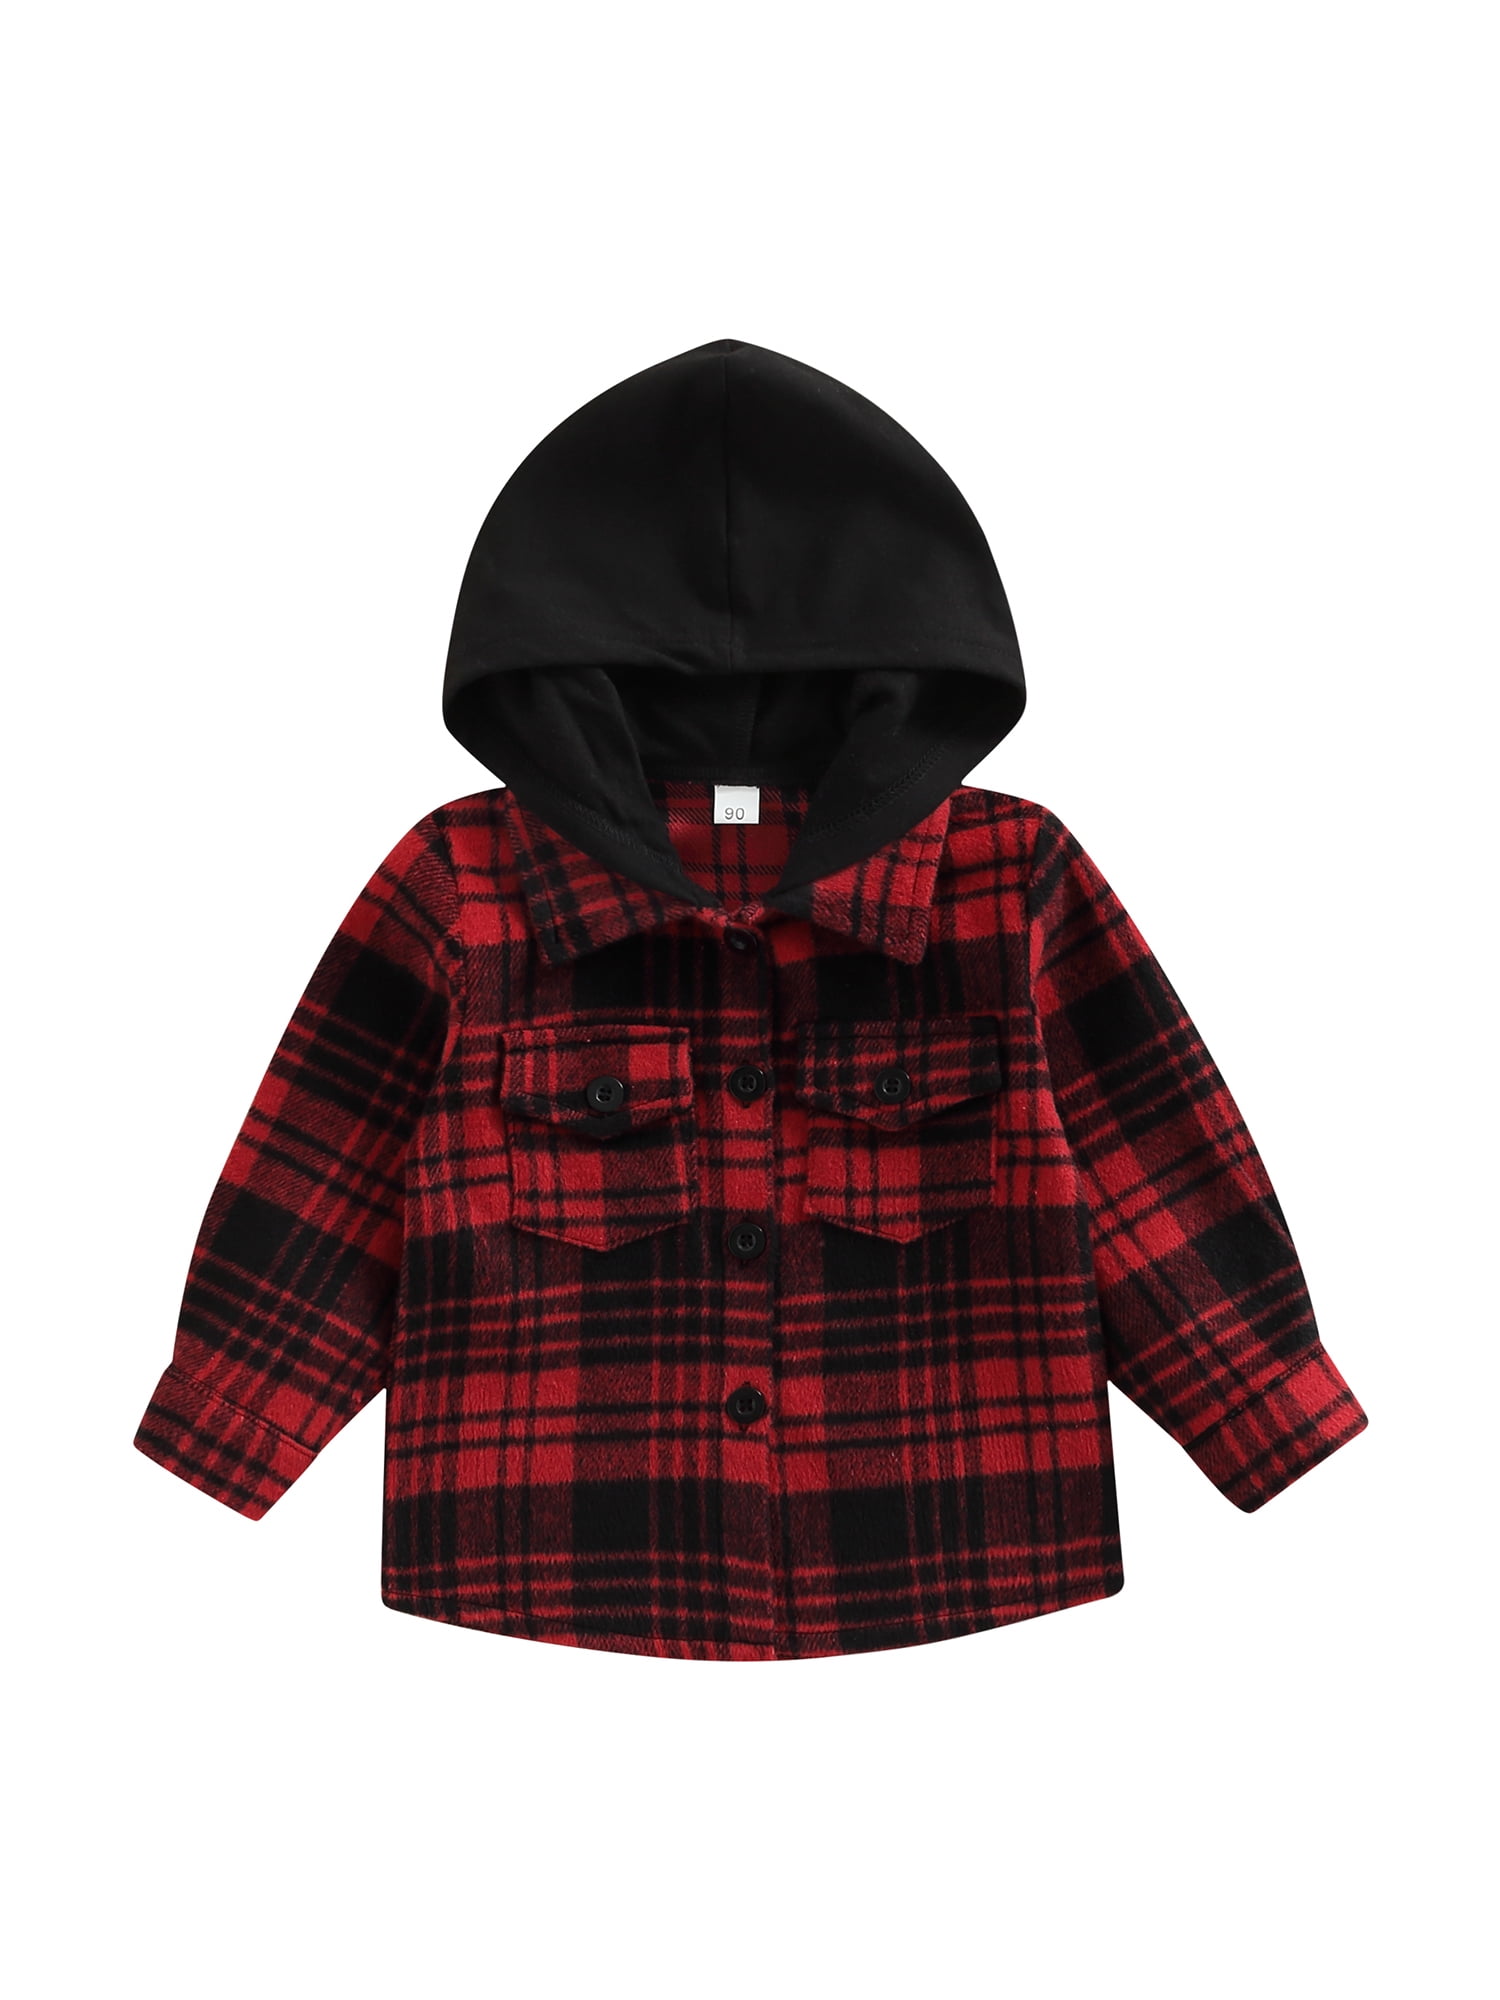 Toddler Kids Baby Boy Girl Long Sleeve Single Breasted Plaid Hooded Shirt Tee Tops Spring Autumn Clothes 